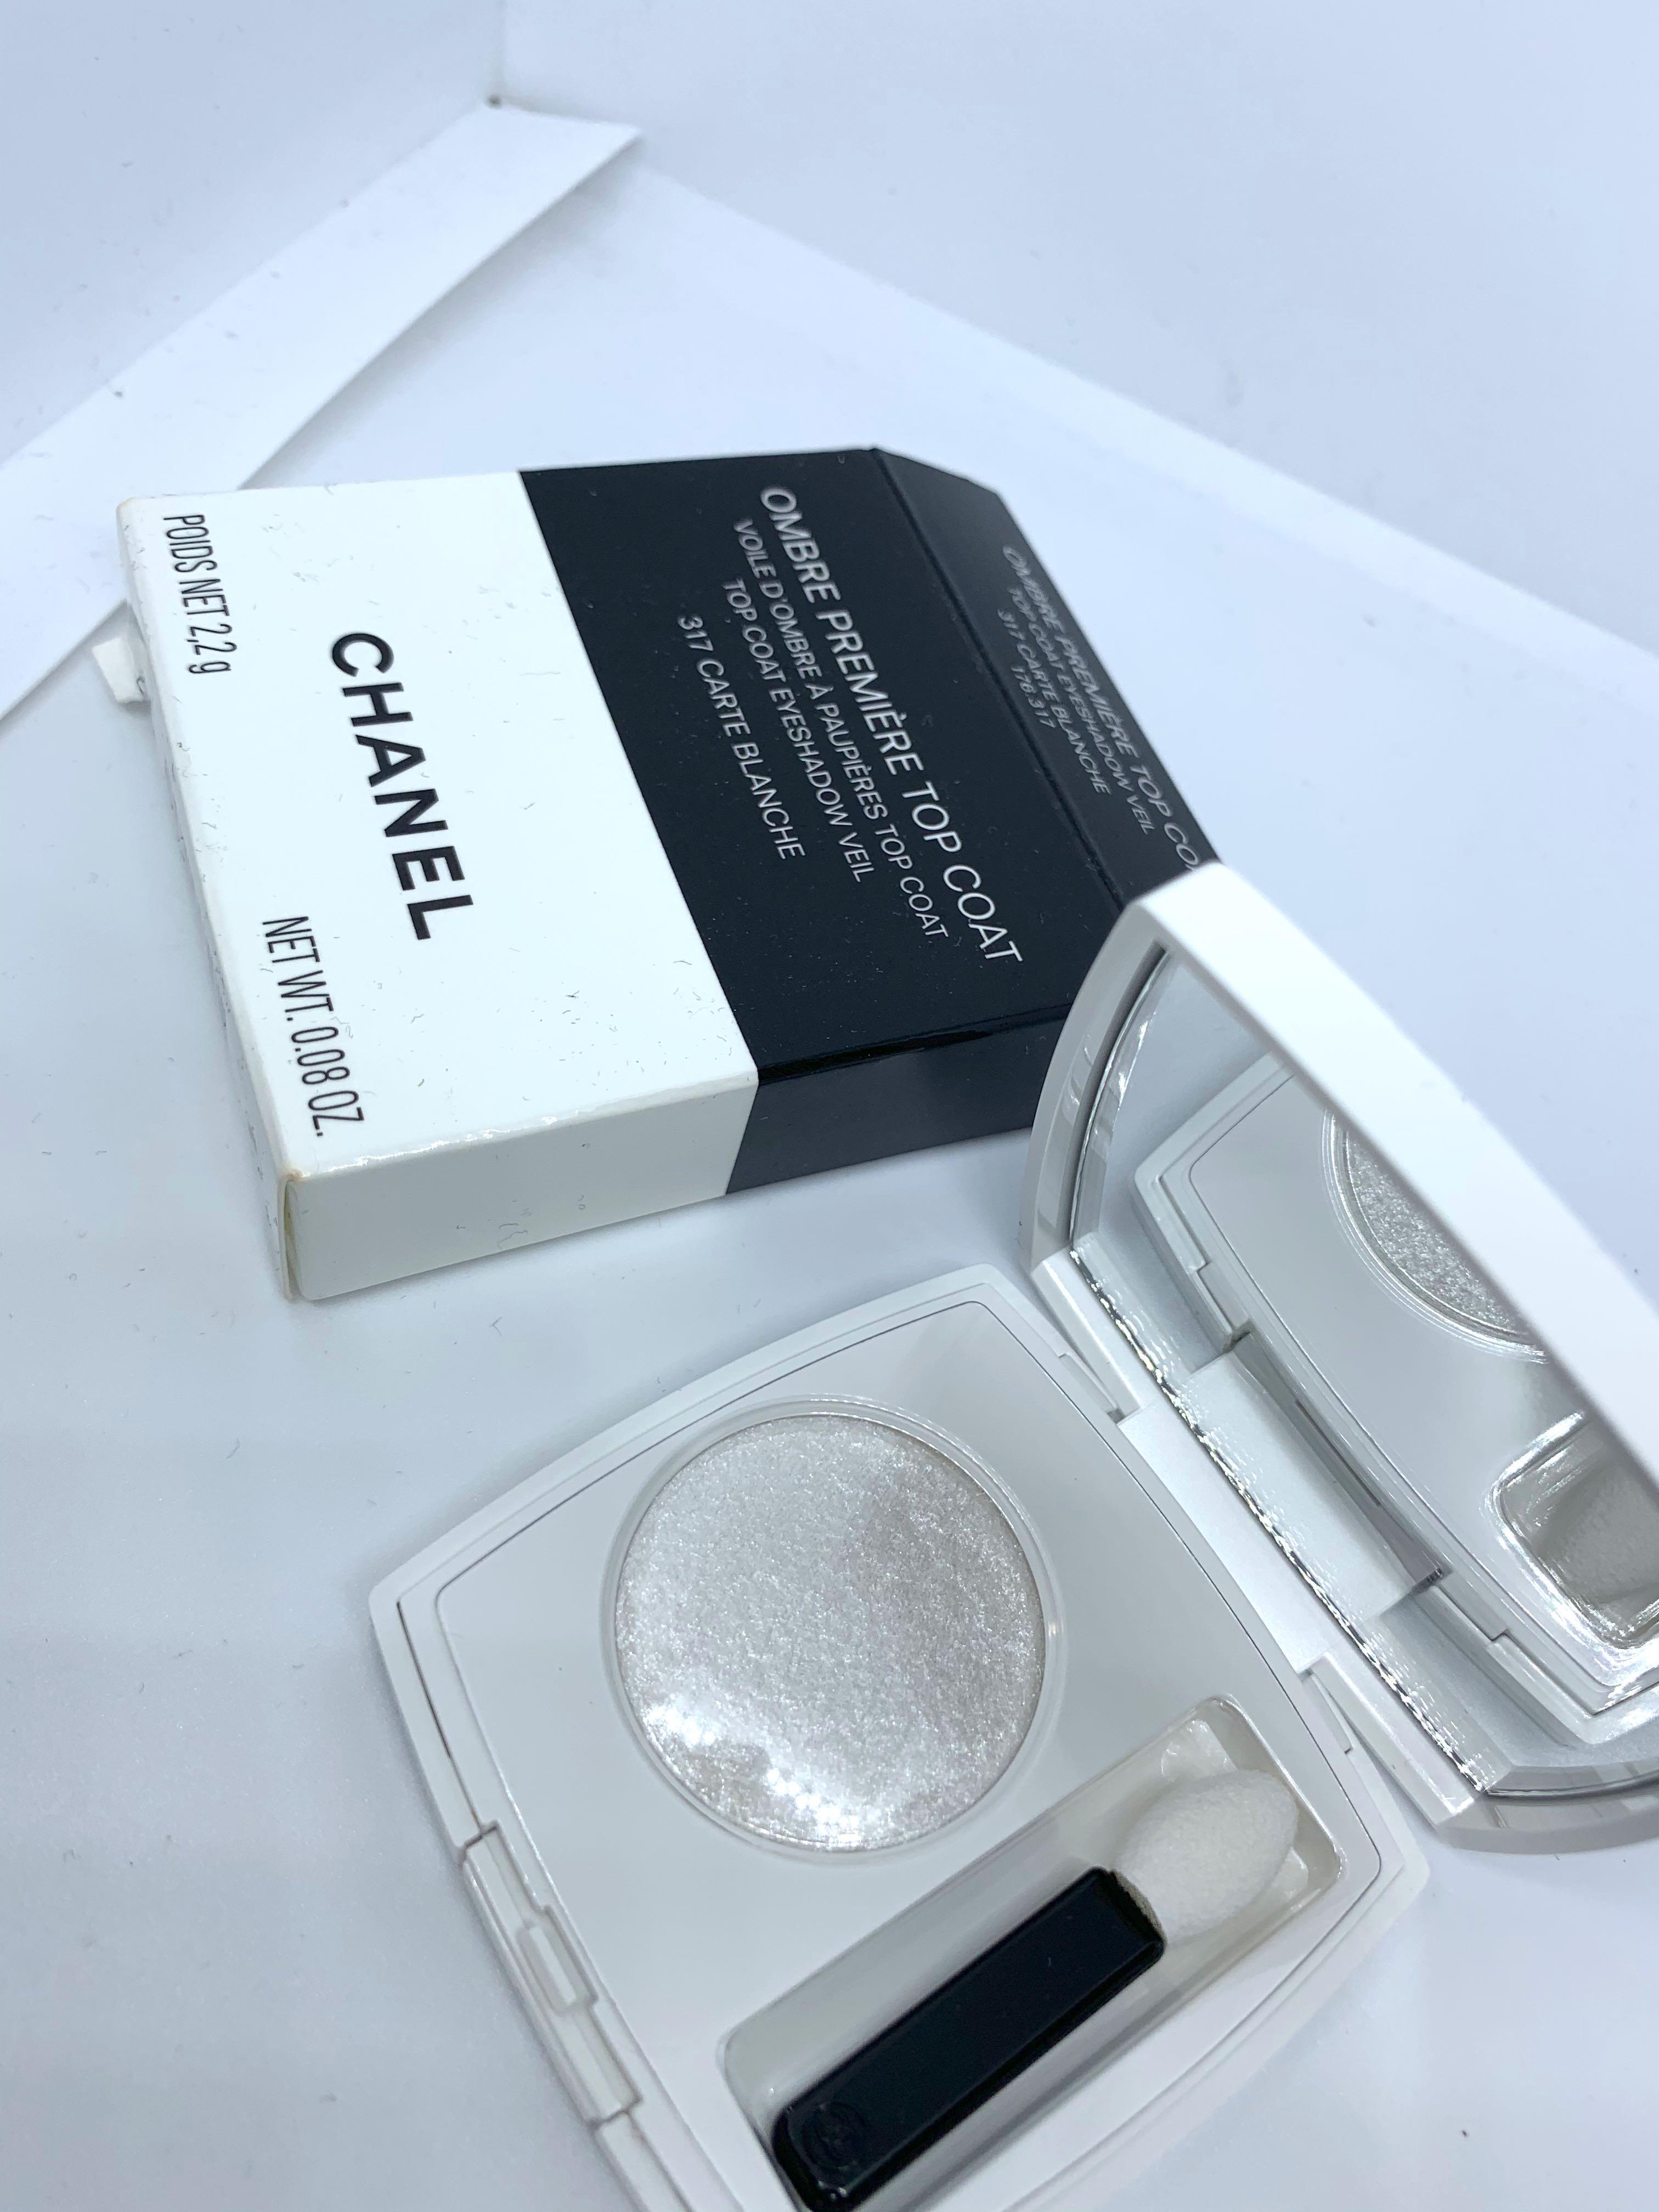 Chanel Carte Blanche (317) Ombre Premiere Top Coat Review & Swatches